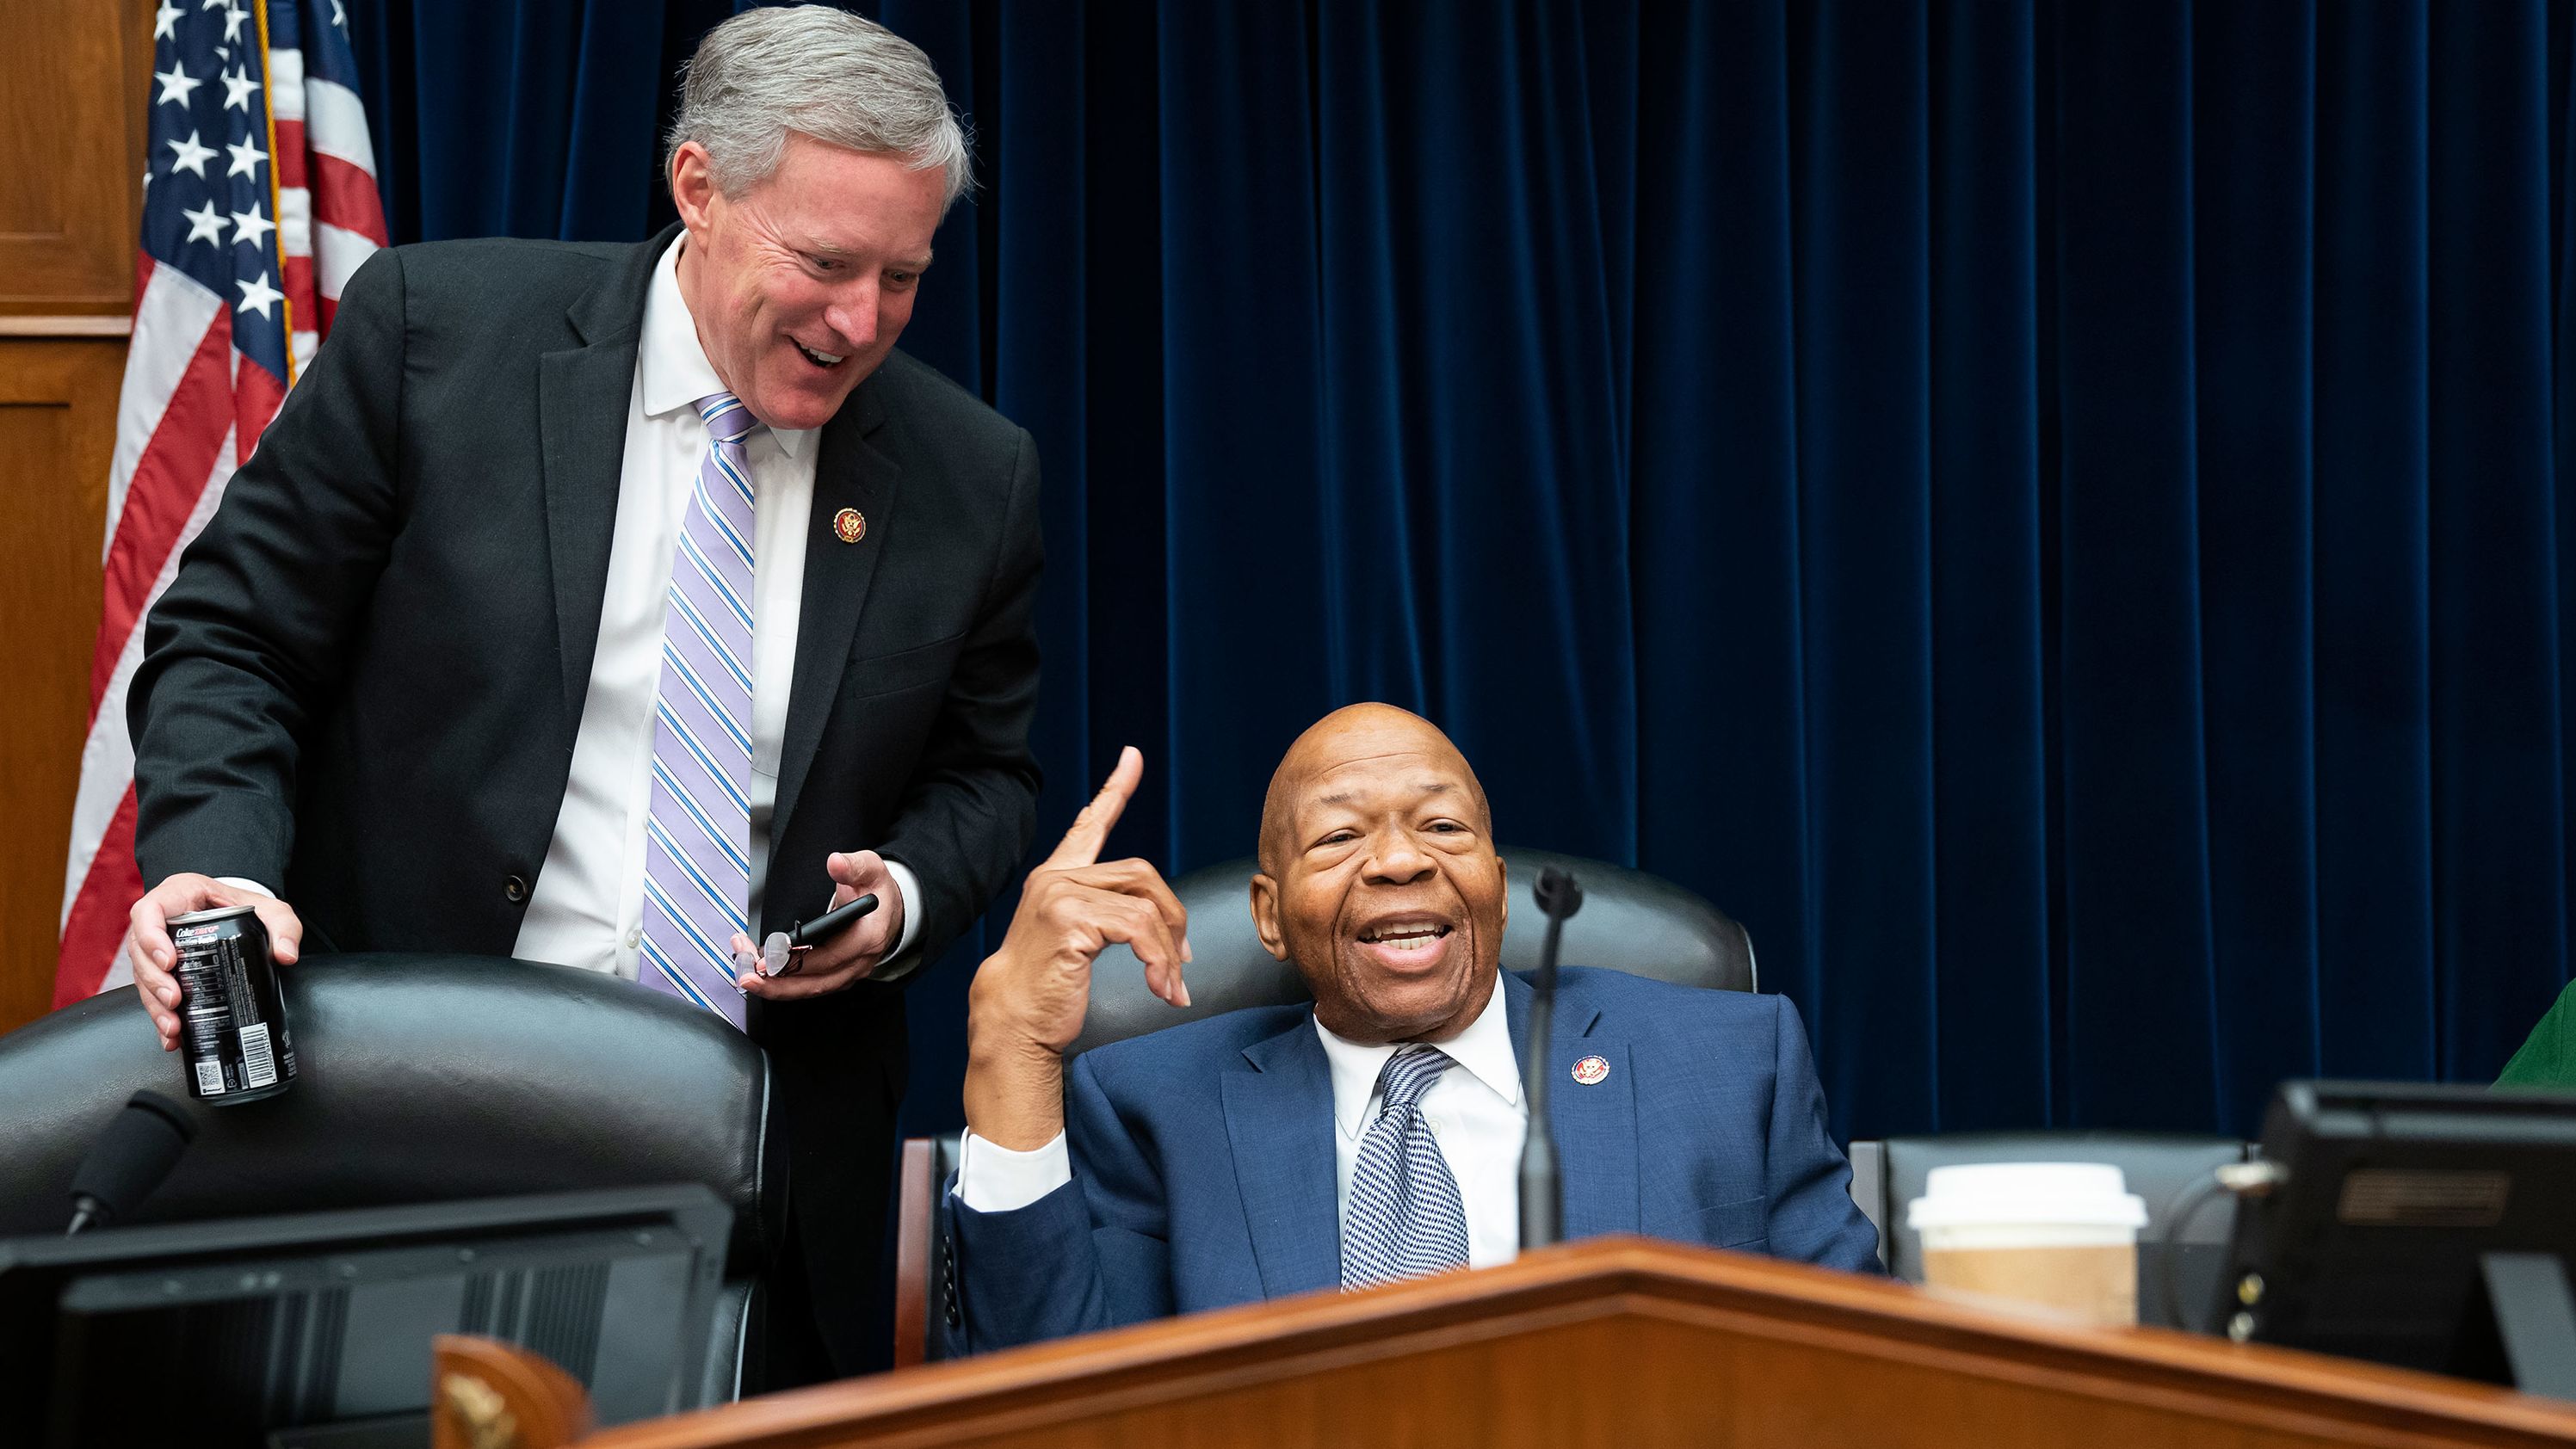 Cummings speaks with US Rep. Mark Meadows in June 2019, just after a panel voted to hold Attorney General William Barr and Commerce Secretary Wilbur Ross in contempt for failing to turn over subpoenaed documents related to the Trump administration's decision to add a citizenship question to the 2020 census.